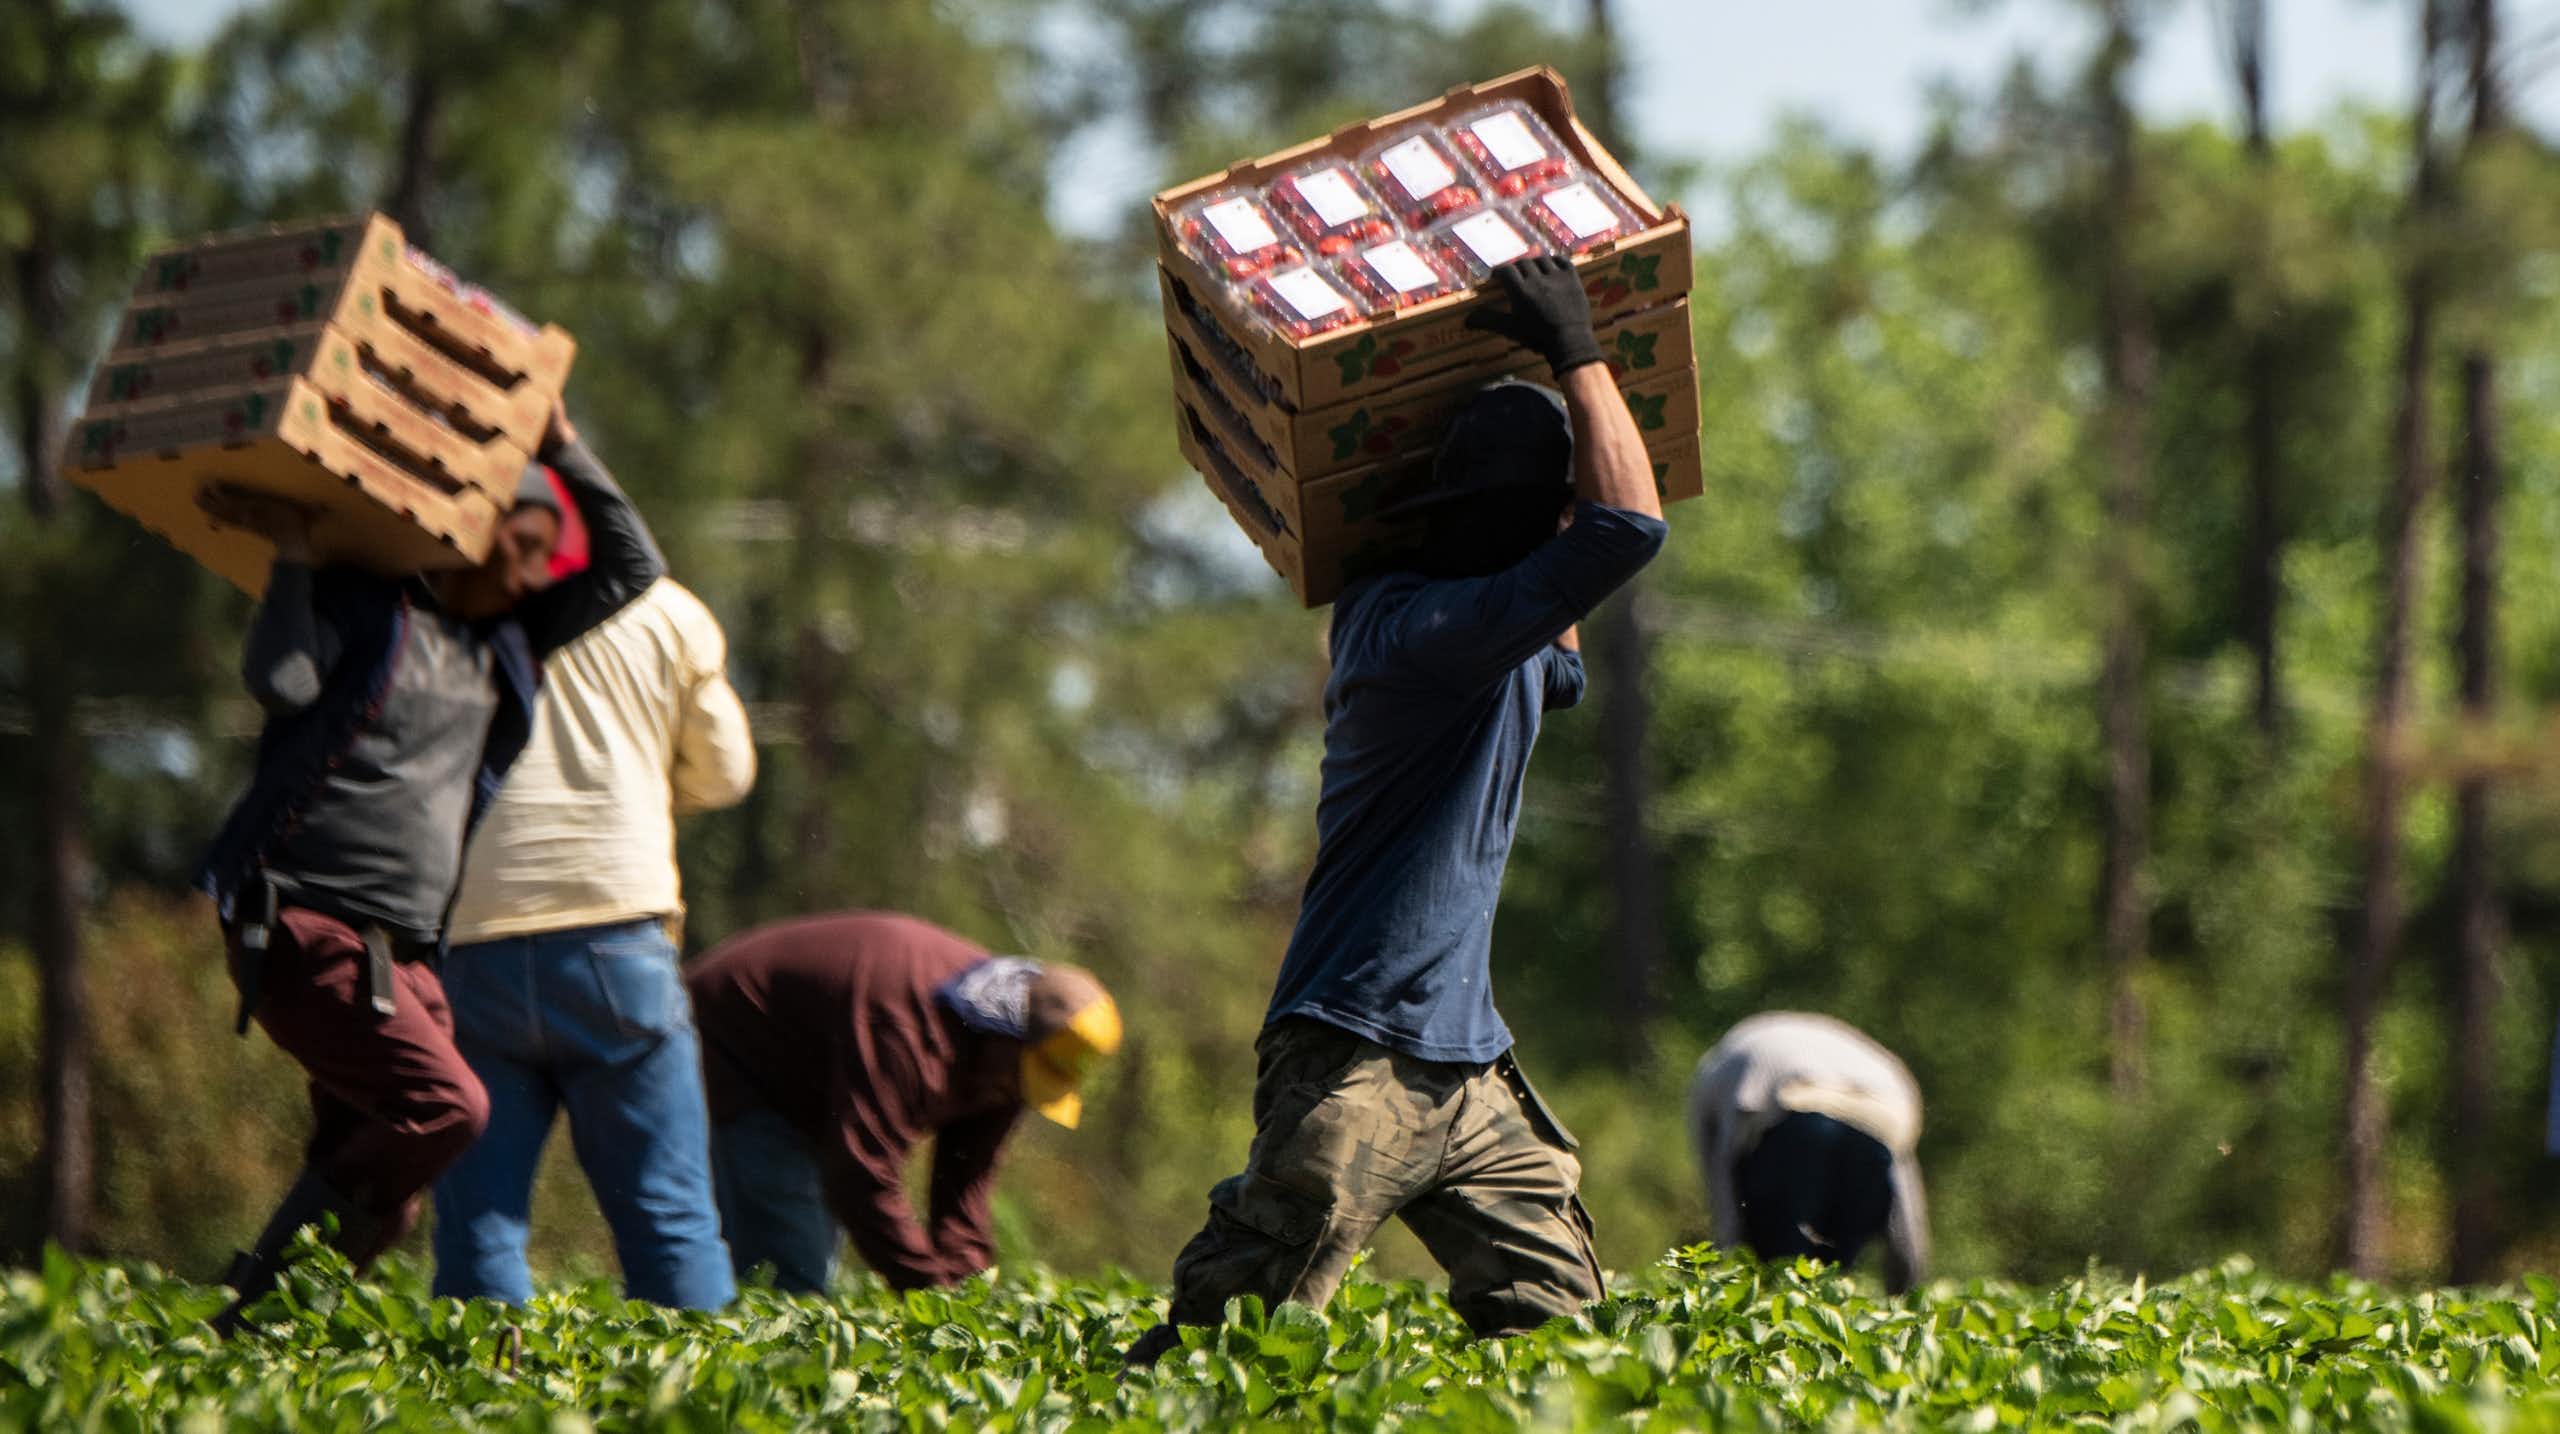 Farm workers carrying boxes of produce in a field.